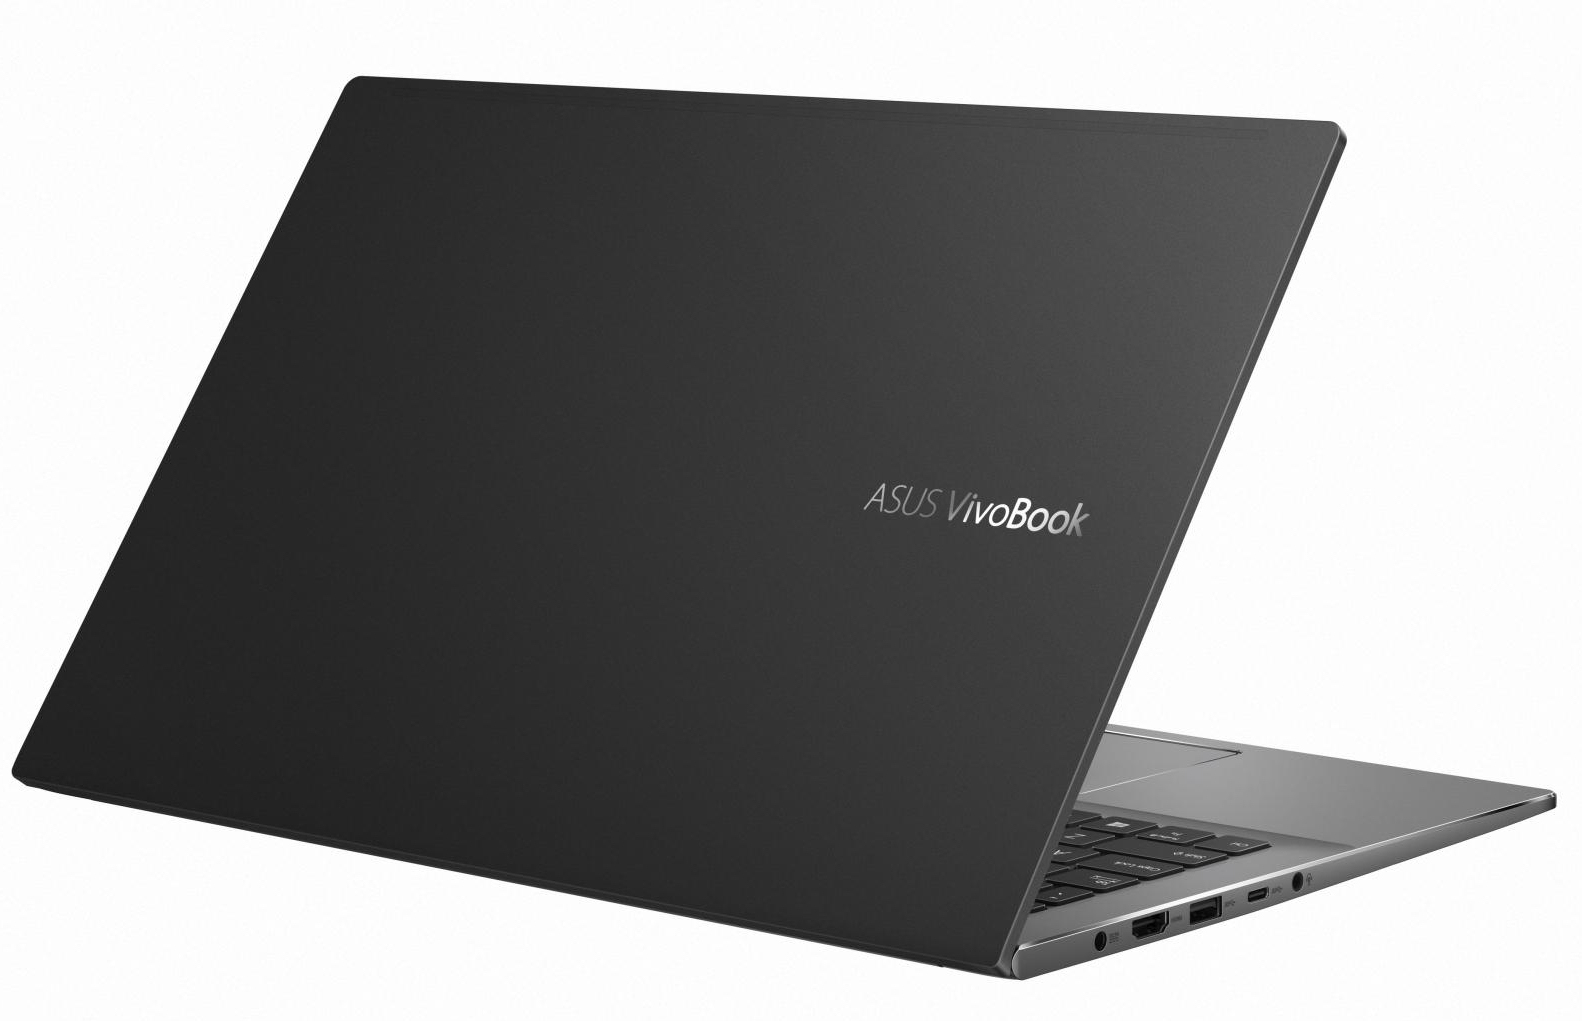 Asus VivoBook S15 S533EQ in review: Elegant all-rounder with equipment weaknesses - NotebookCheck.net Reviews